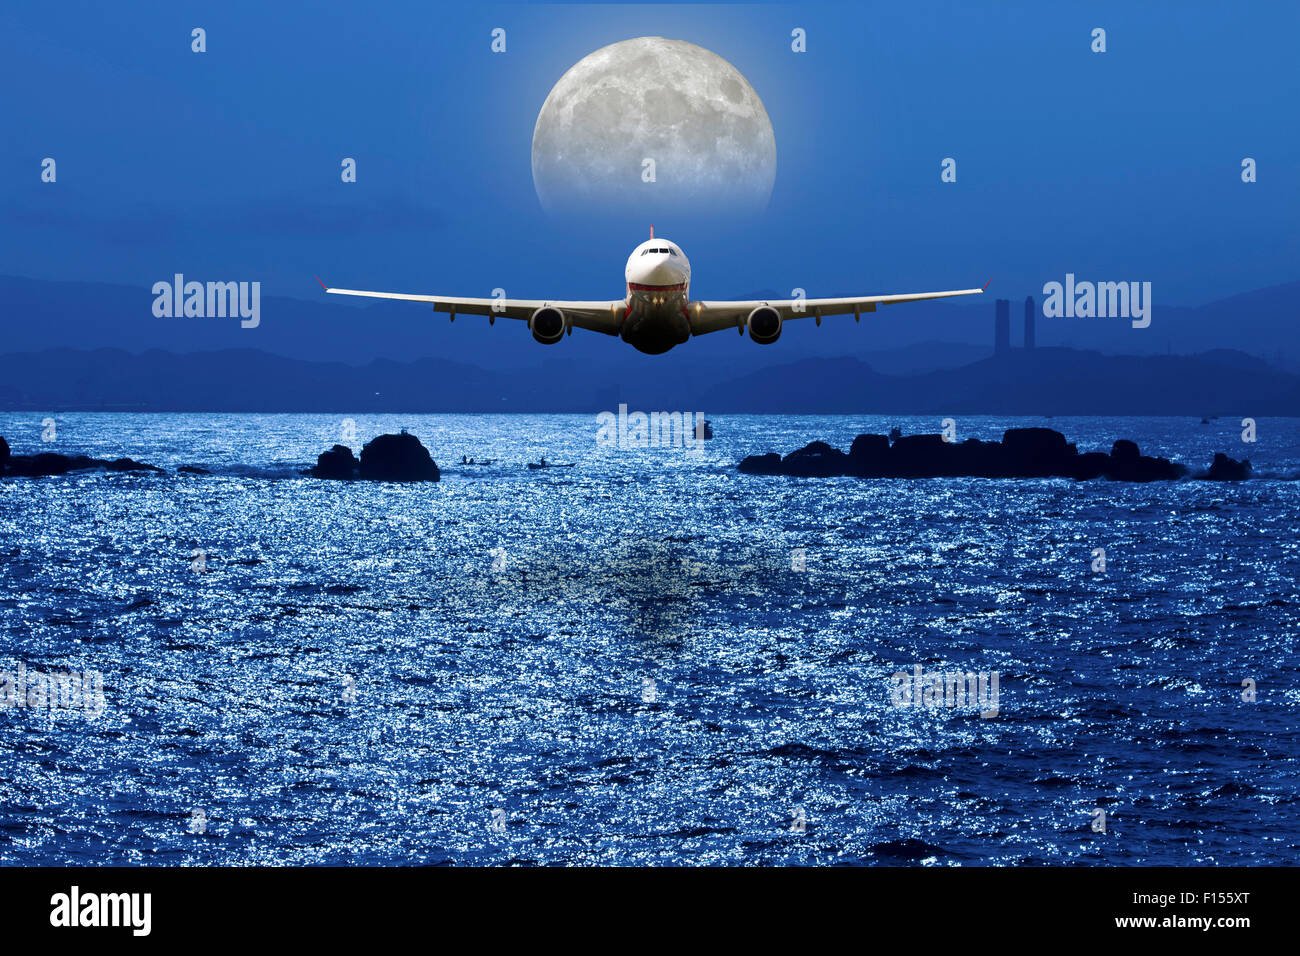 airplane fly above ocean under moonlight Stock Photo